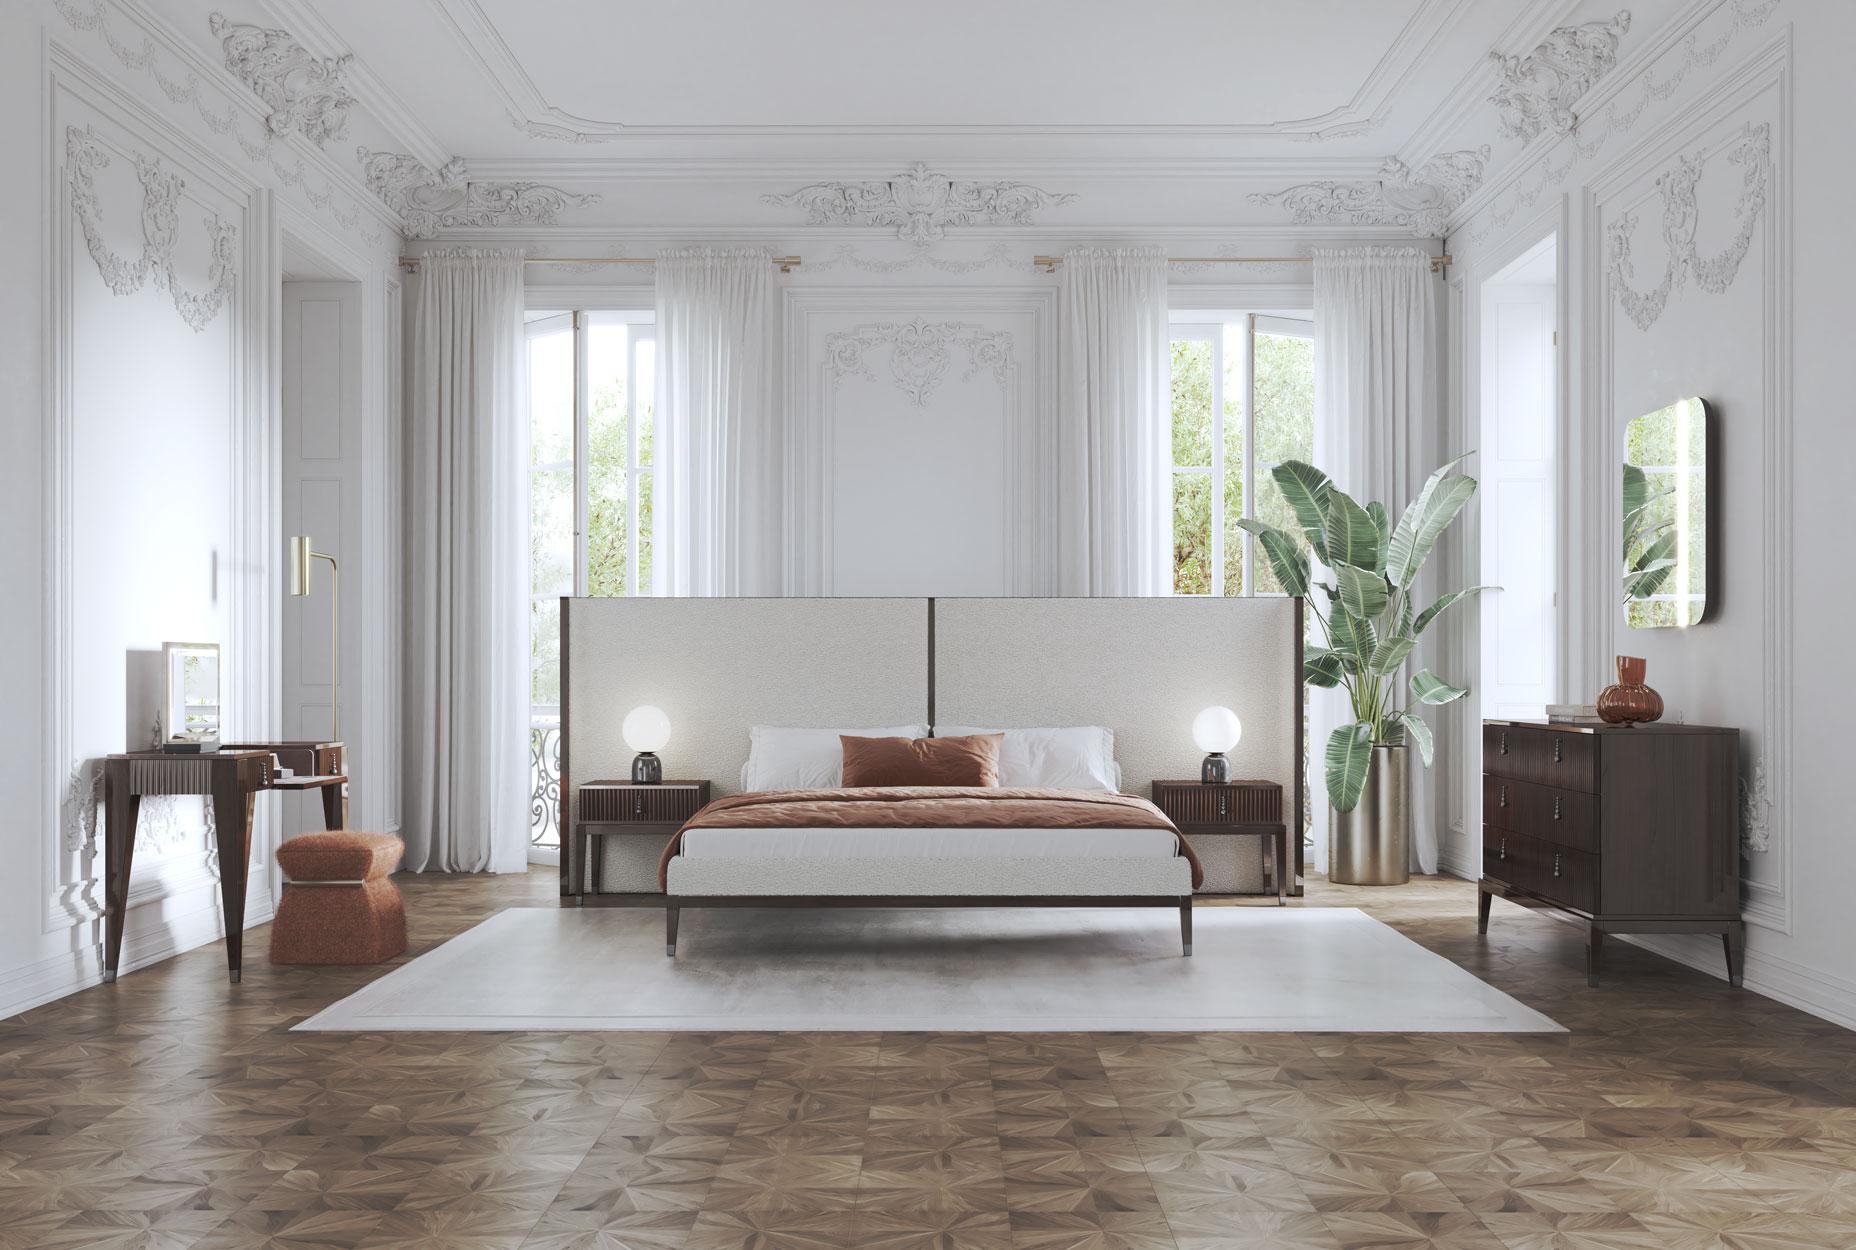 Thyia is an upholstered bed born from the encounter between design and craftsmanship. Headboard in curved poplar plywood, bed frame in oak wook. The headboard and bed frame are upholstered in high-density rubber and covered in ivory fabric. Legs,